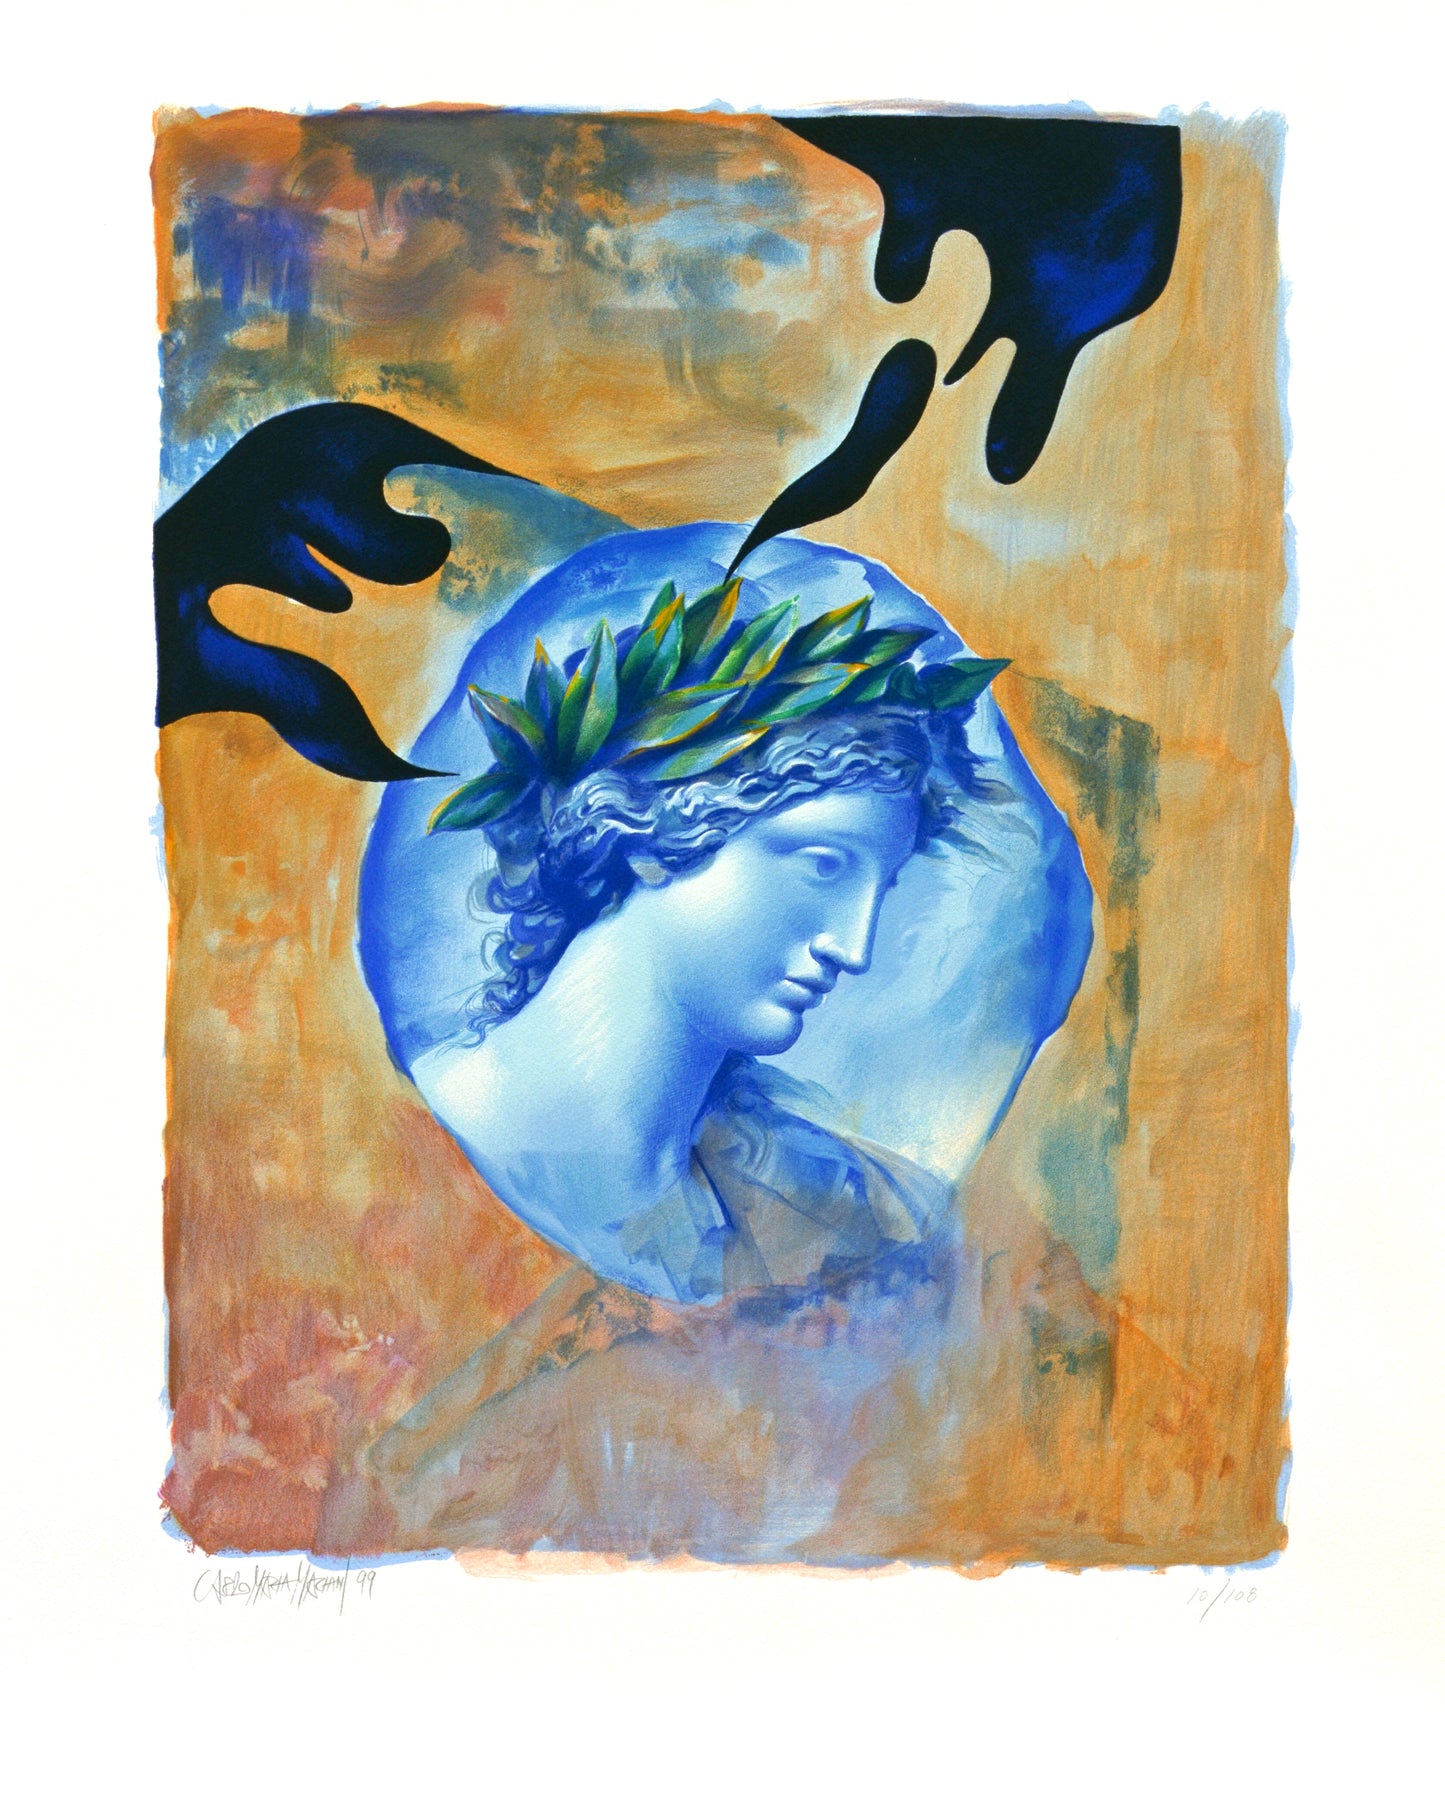 	"Incoronato (The Crowning)" by Carlo Maria Mariani,  Classical realism: a bust of a Greek figure adorned with a laurel wreath, rendered in cool blues and surrounded by abstract, expressionist black shapes against a textured, impressionist background.